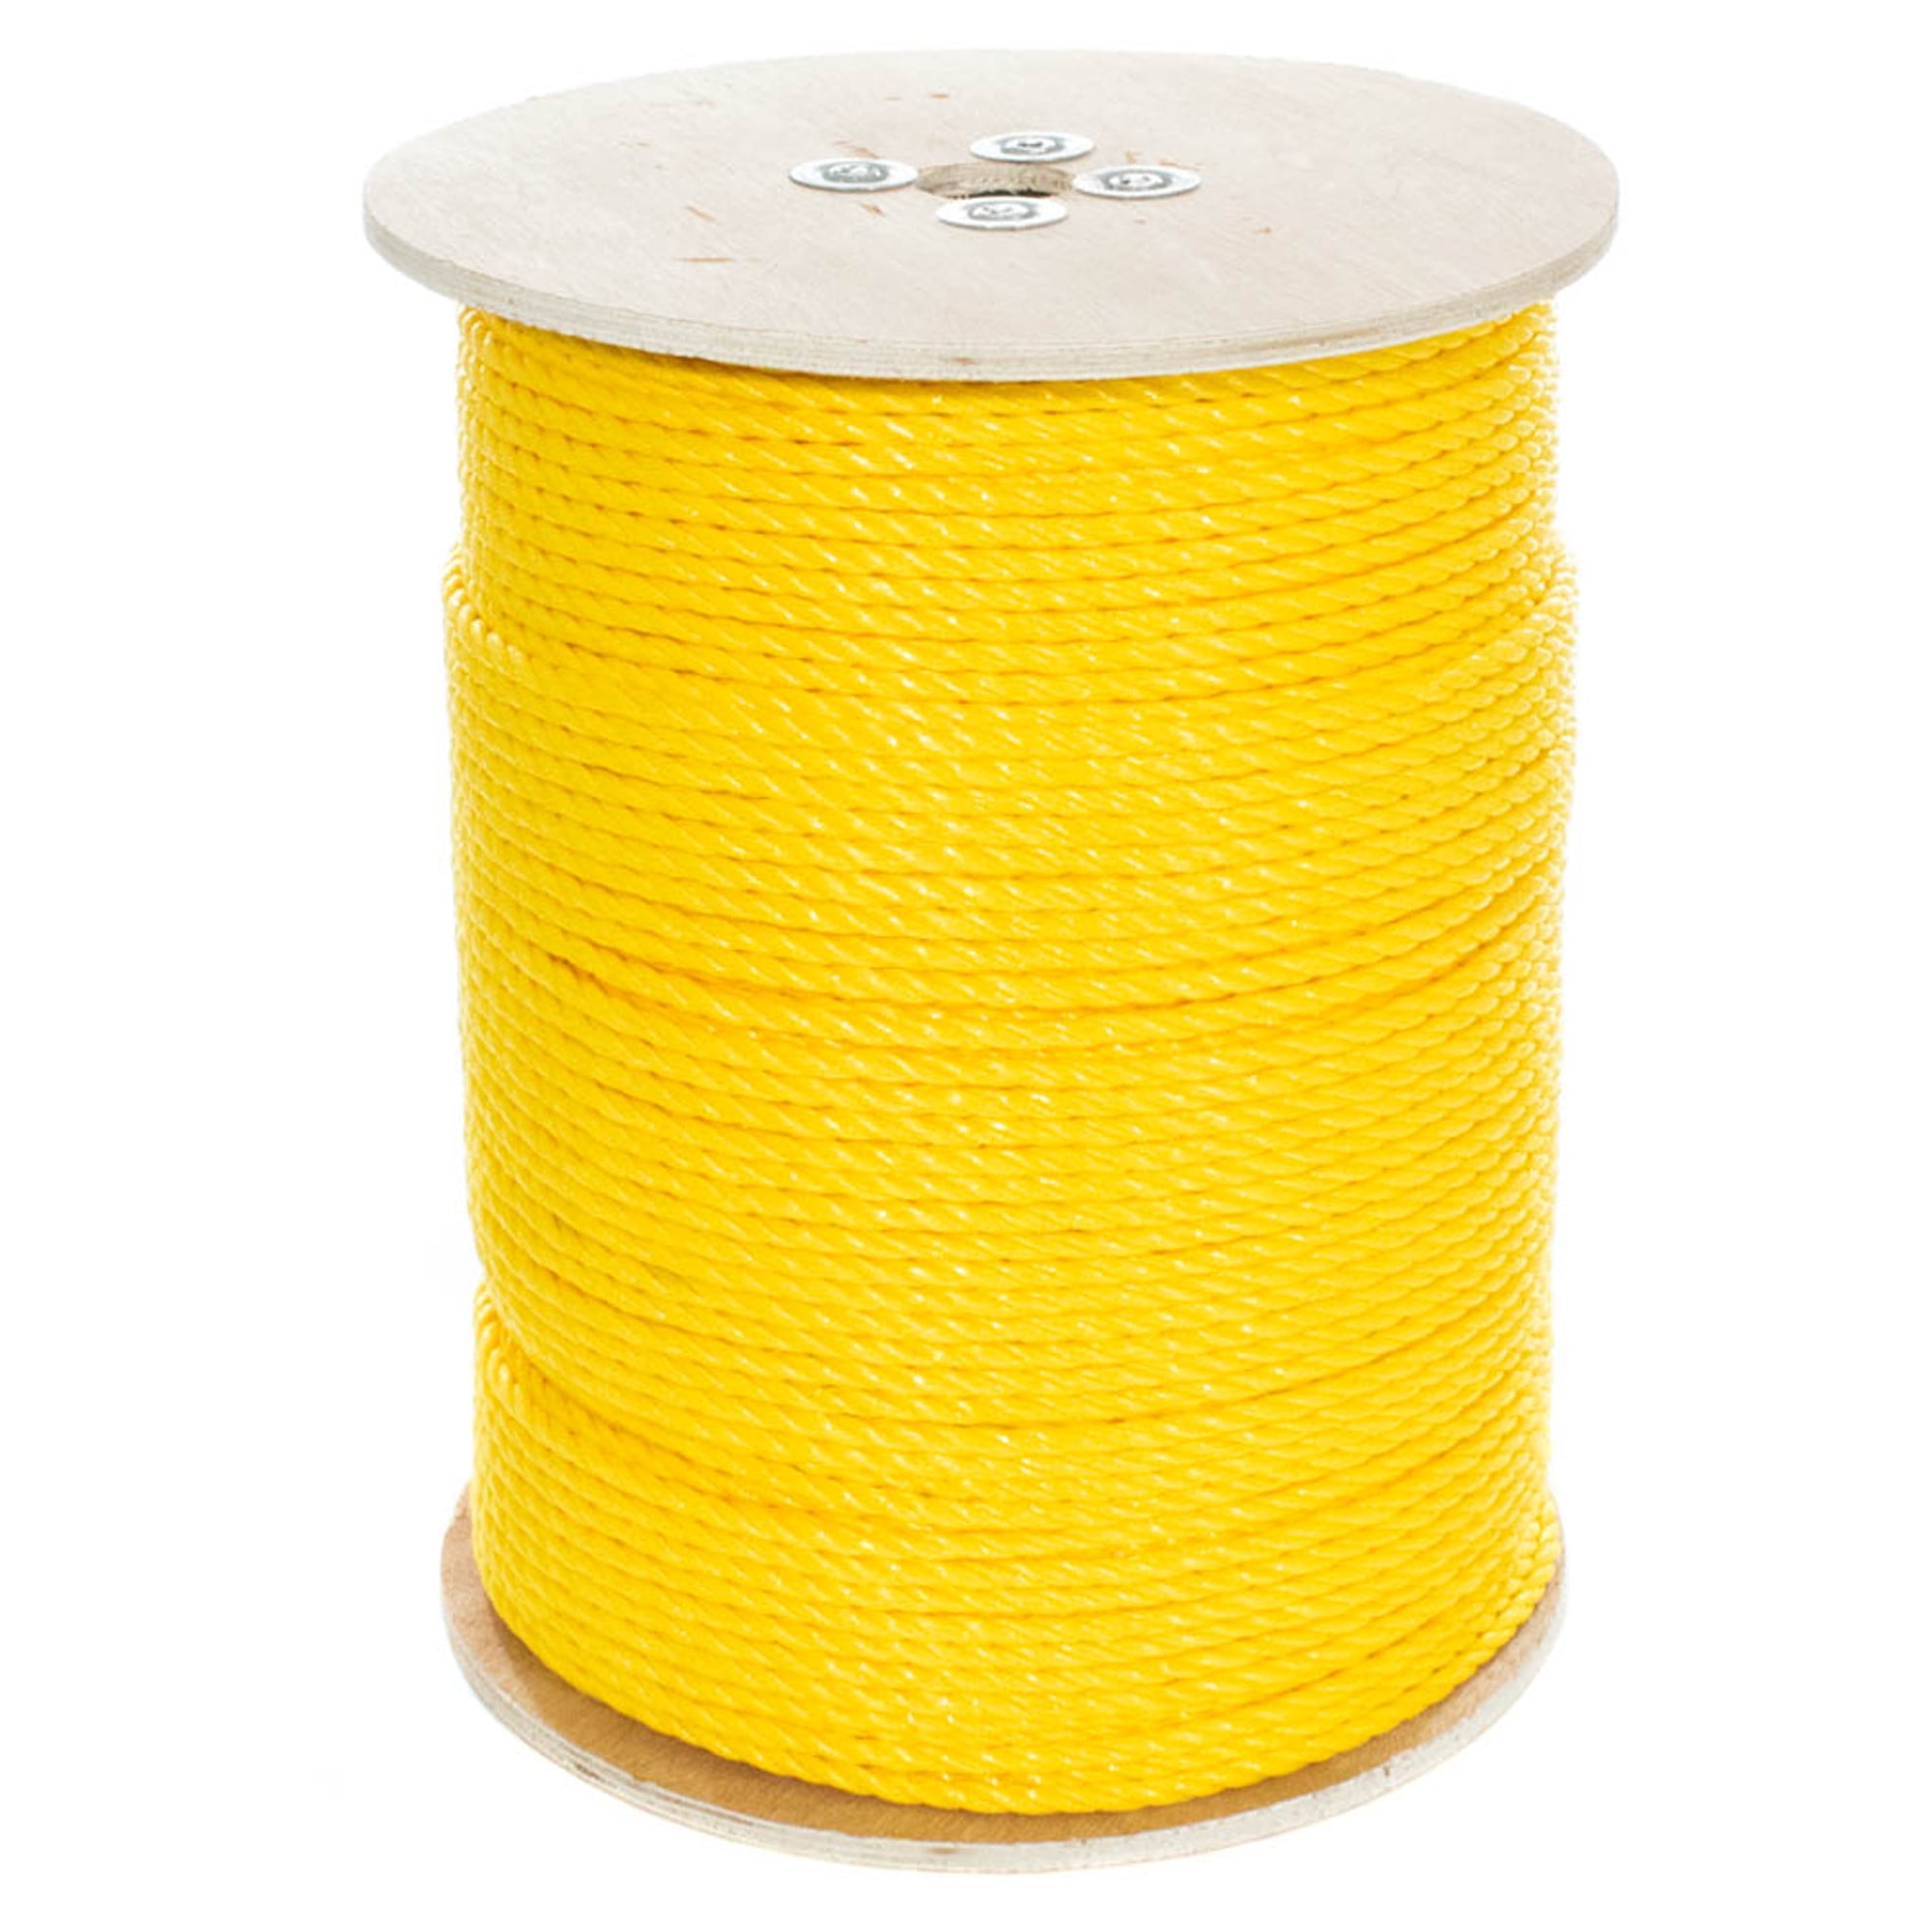 Made in USA Yellow of hollow braid Polypropylene rope 1/4" 200 ft 